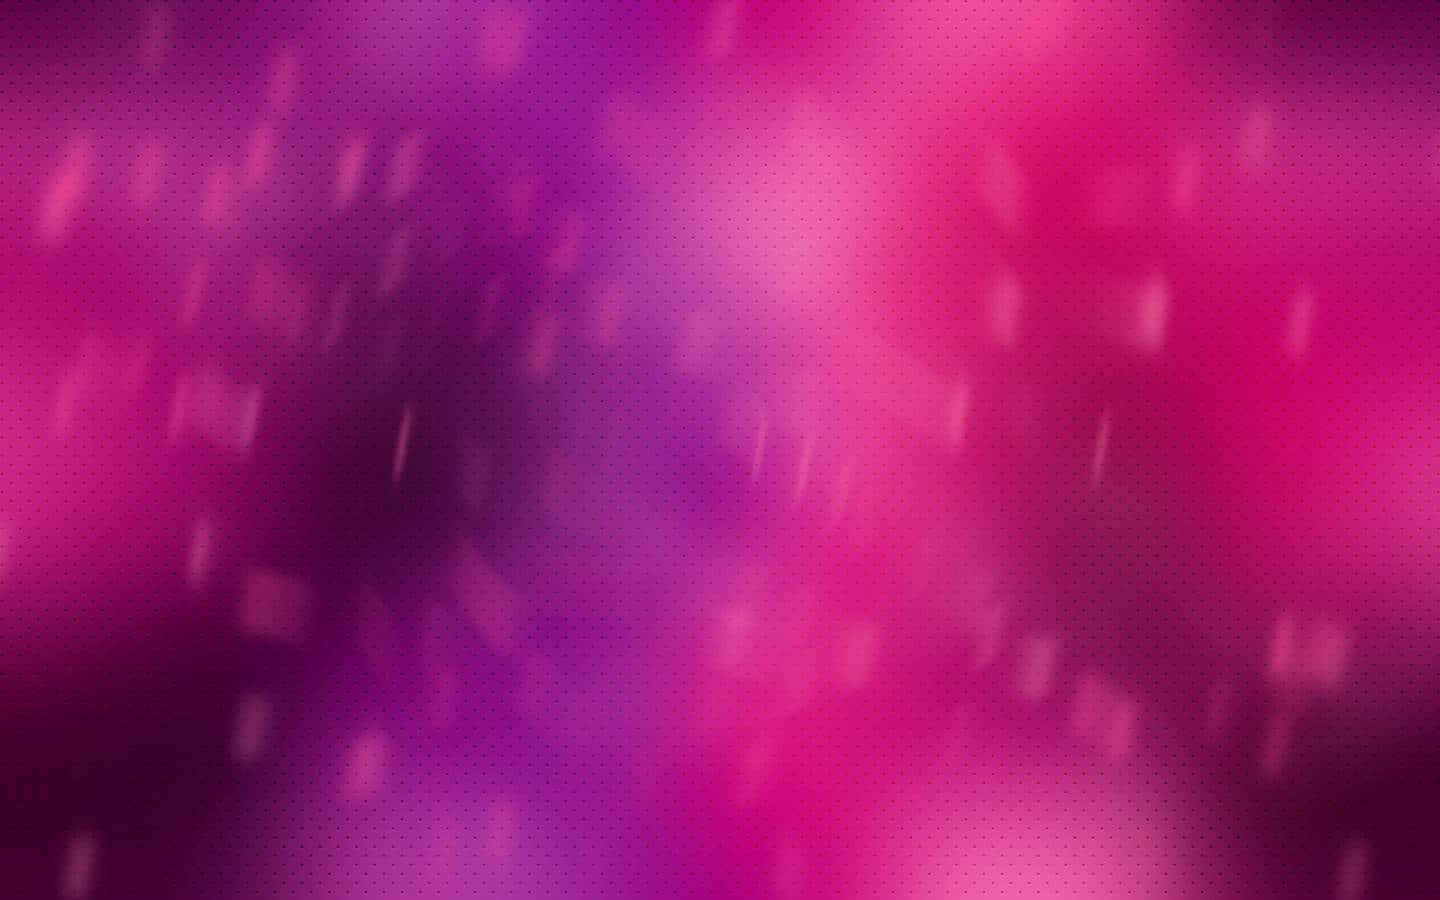 Stunning Abstract Purple and Pink Background